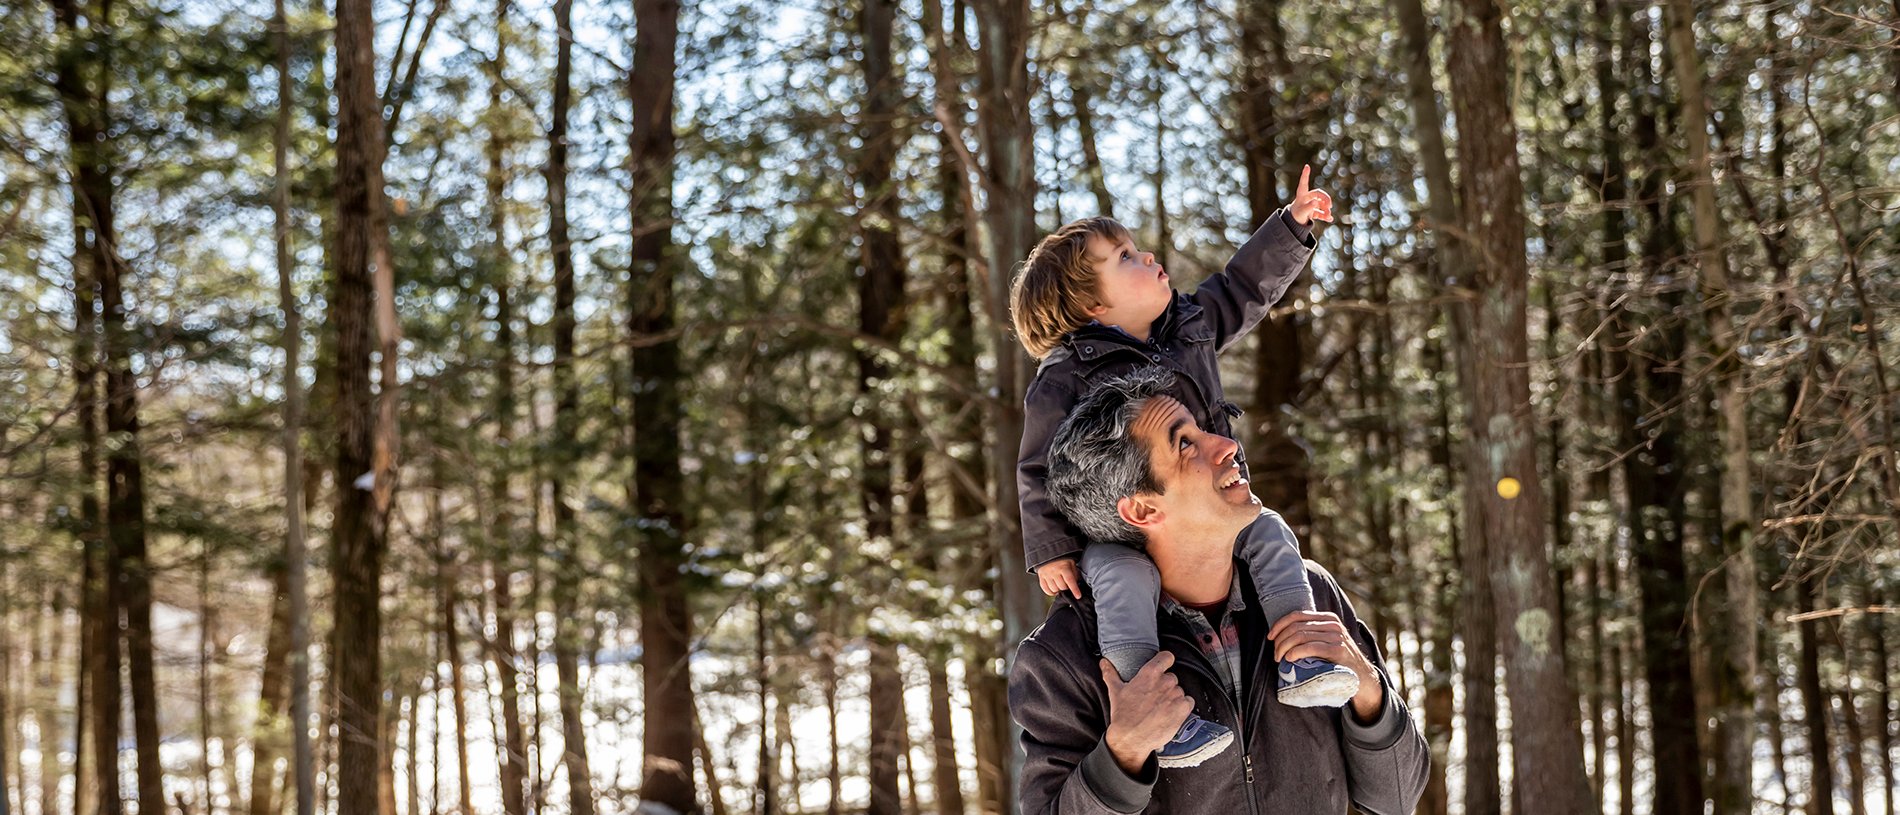 Son on Father's shoulders pointing up. Snow and trees in background.